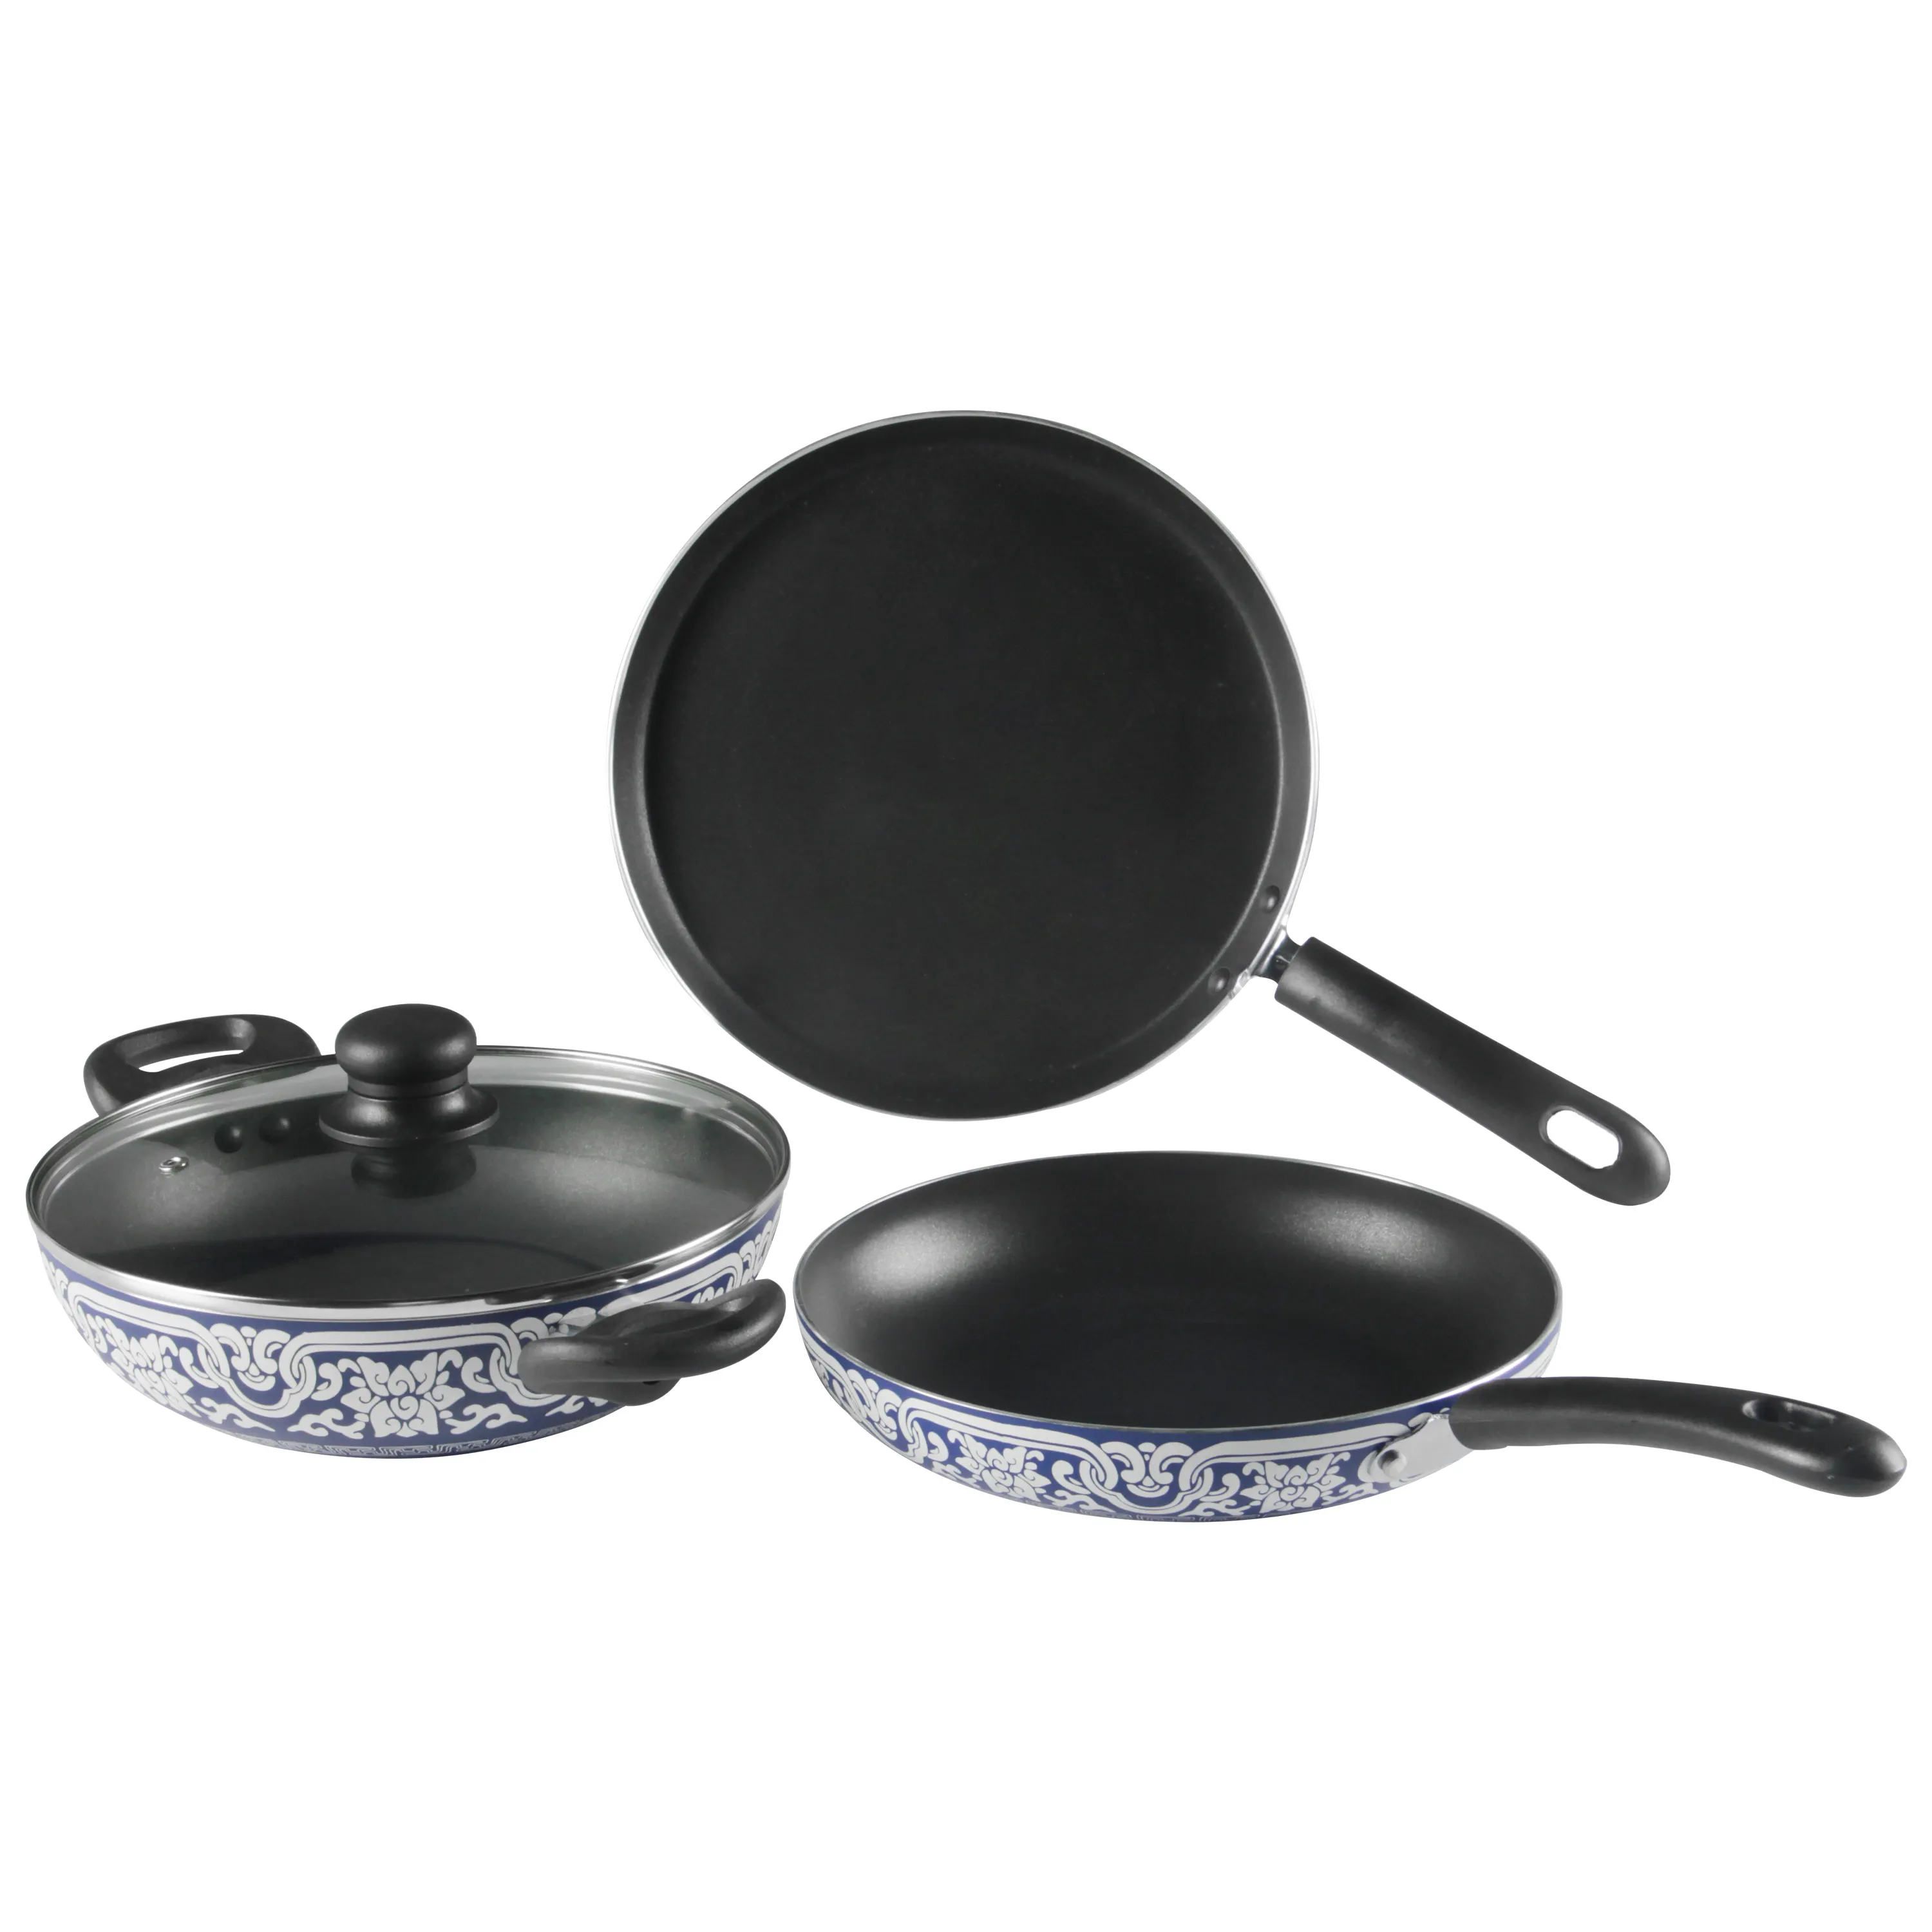 New design Chinese print design wok kitchen cookware set non stick frying pan and lid